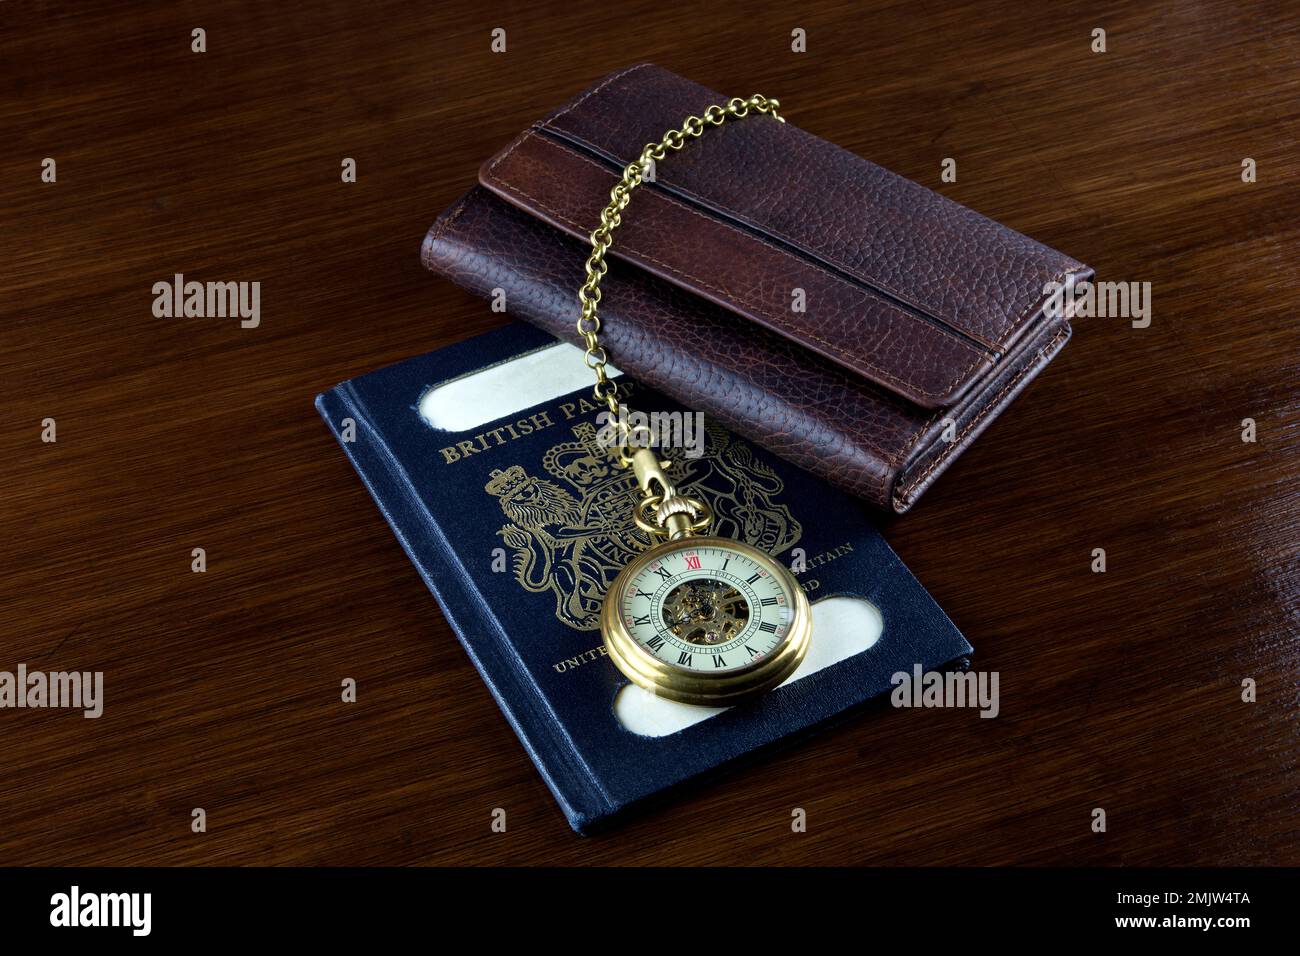 Old pocket watch with leather wallet and vintage UK passport on a wooden table top Stock Photo